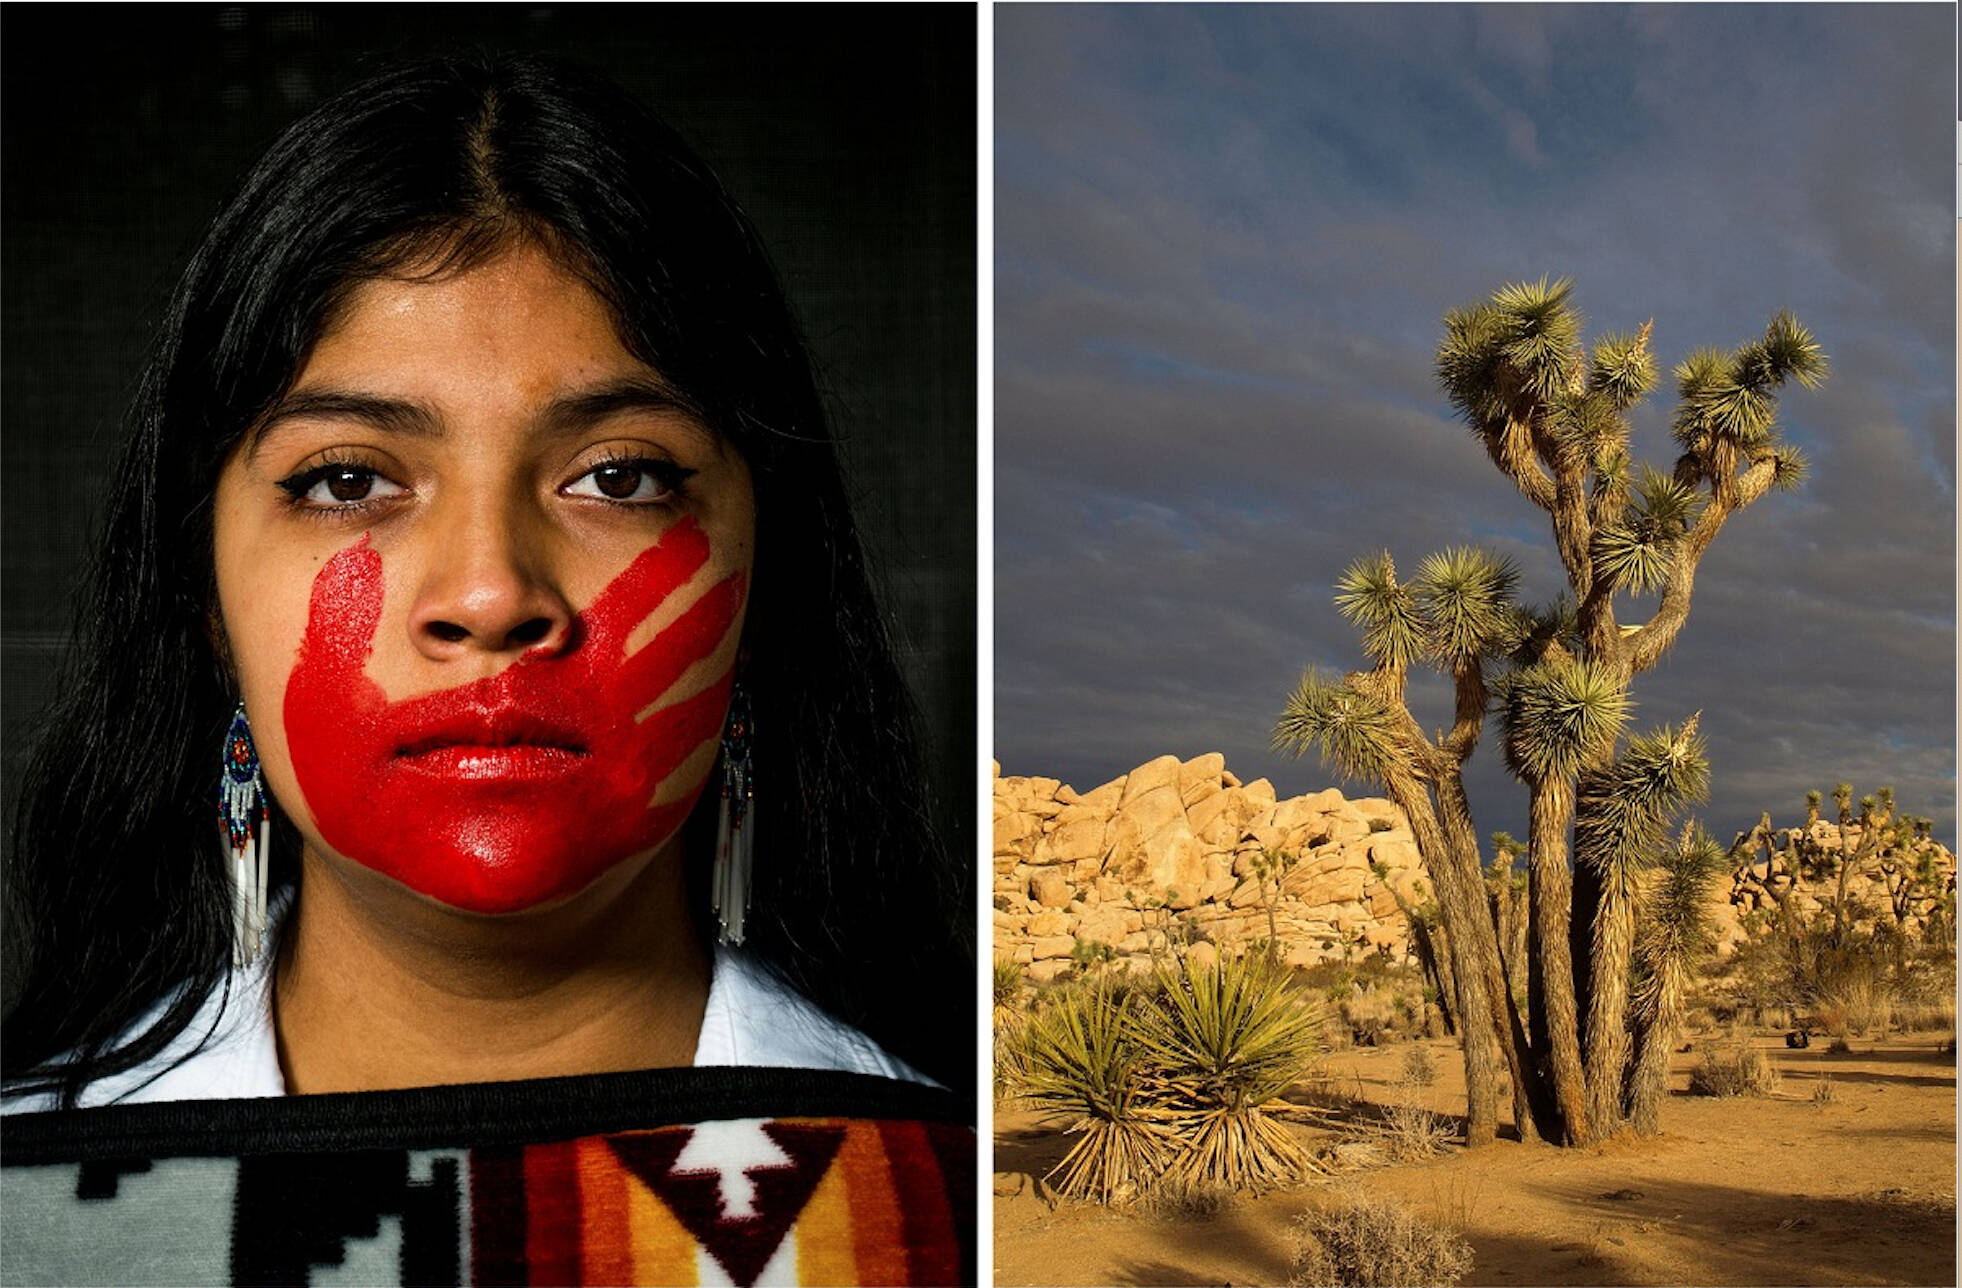 6th District Congressional Art winners. Angelina Kollodge won first place with her photo ‘Fierce Silence,’ and Maddy Coodro won third place with her photo ‘Desert Beauty.’ Courtesy photo